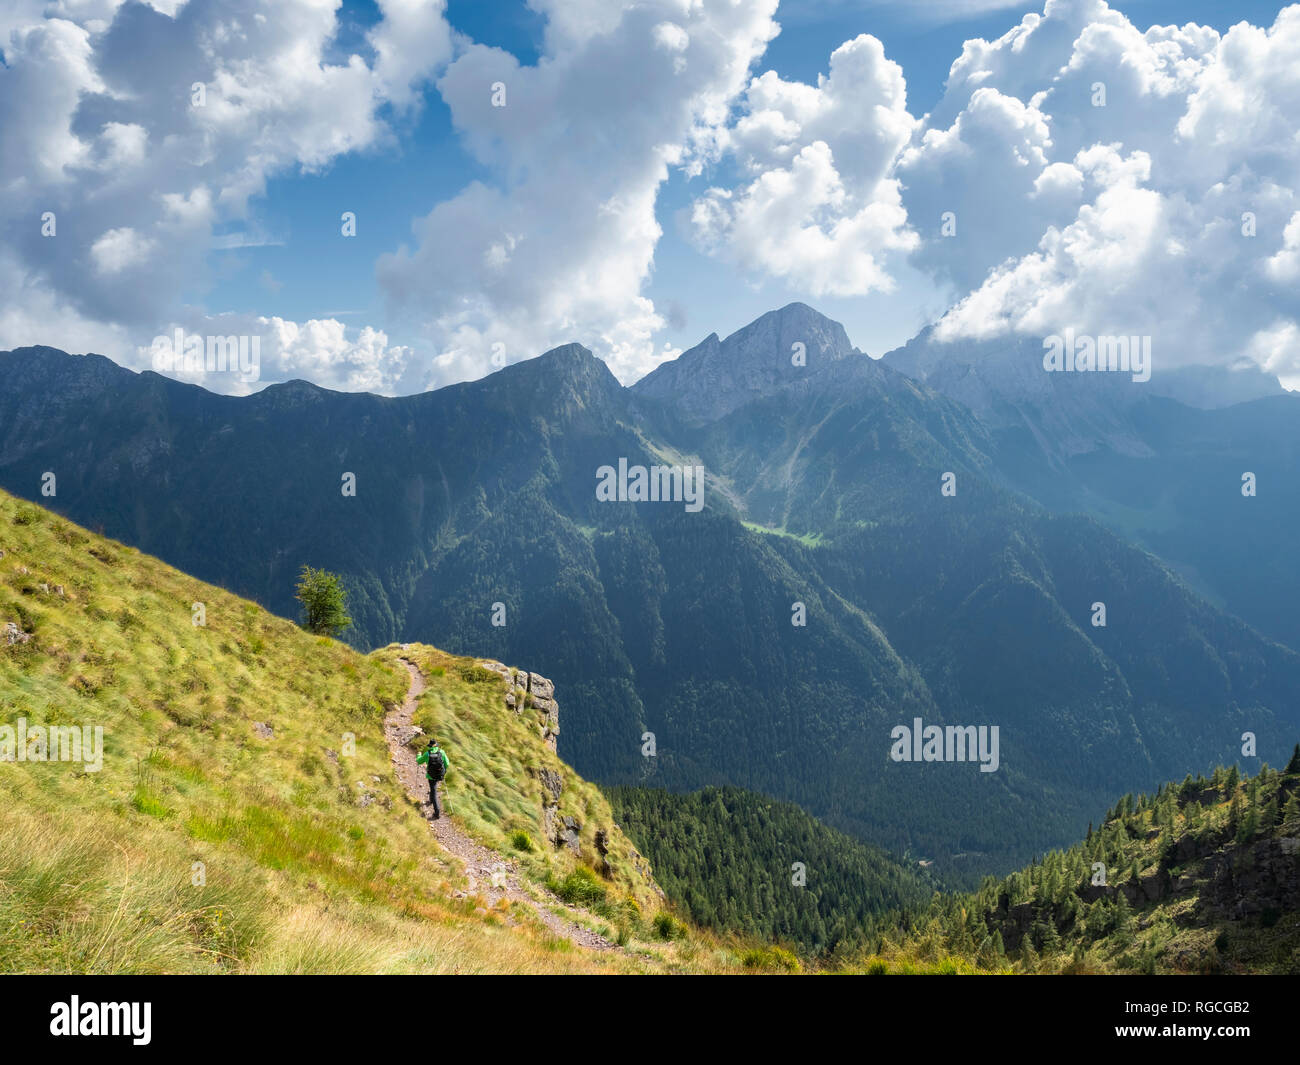 Italy, Lombardy, Valle di Scalve, hiker on hiking trail, Mount Camino Stock Photo